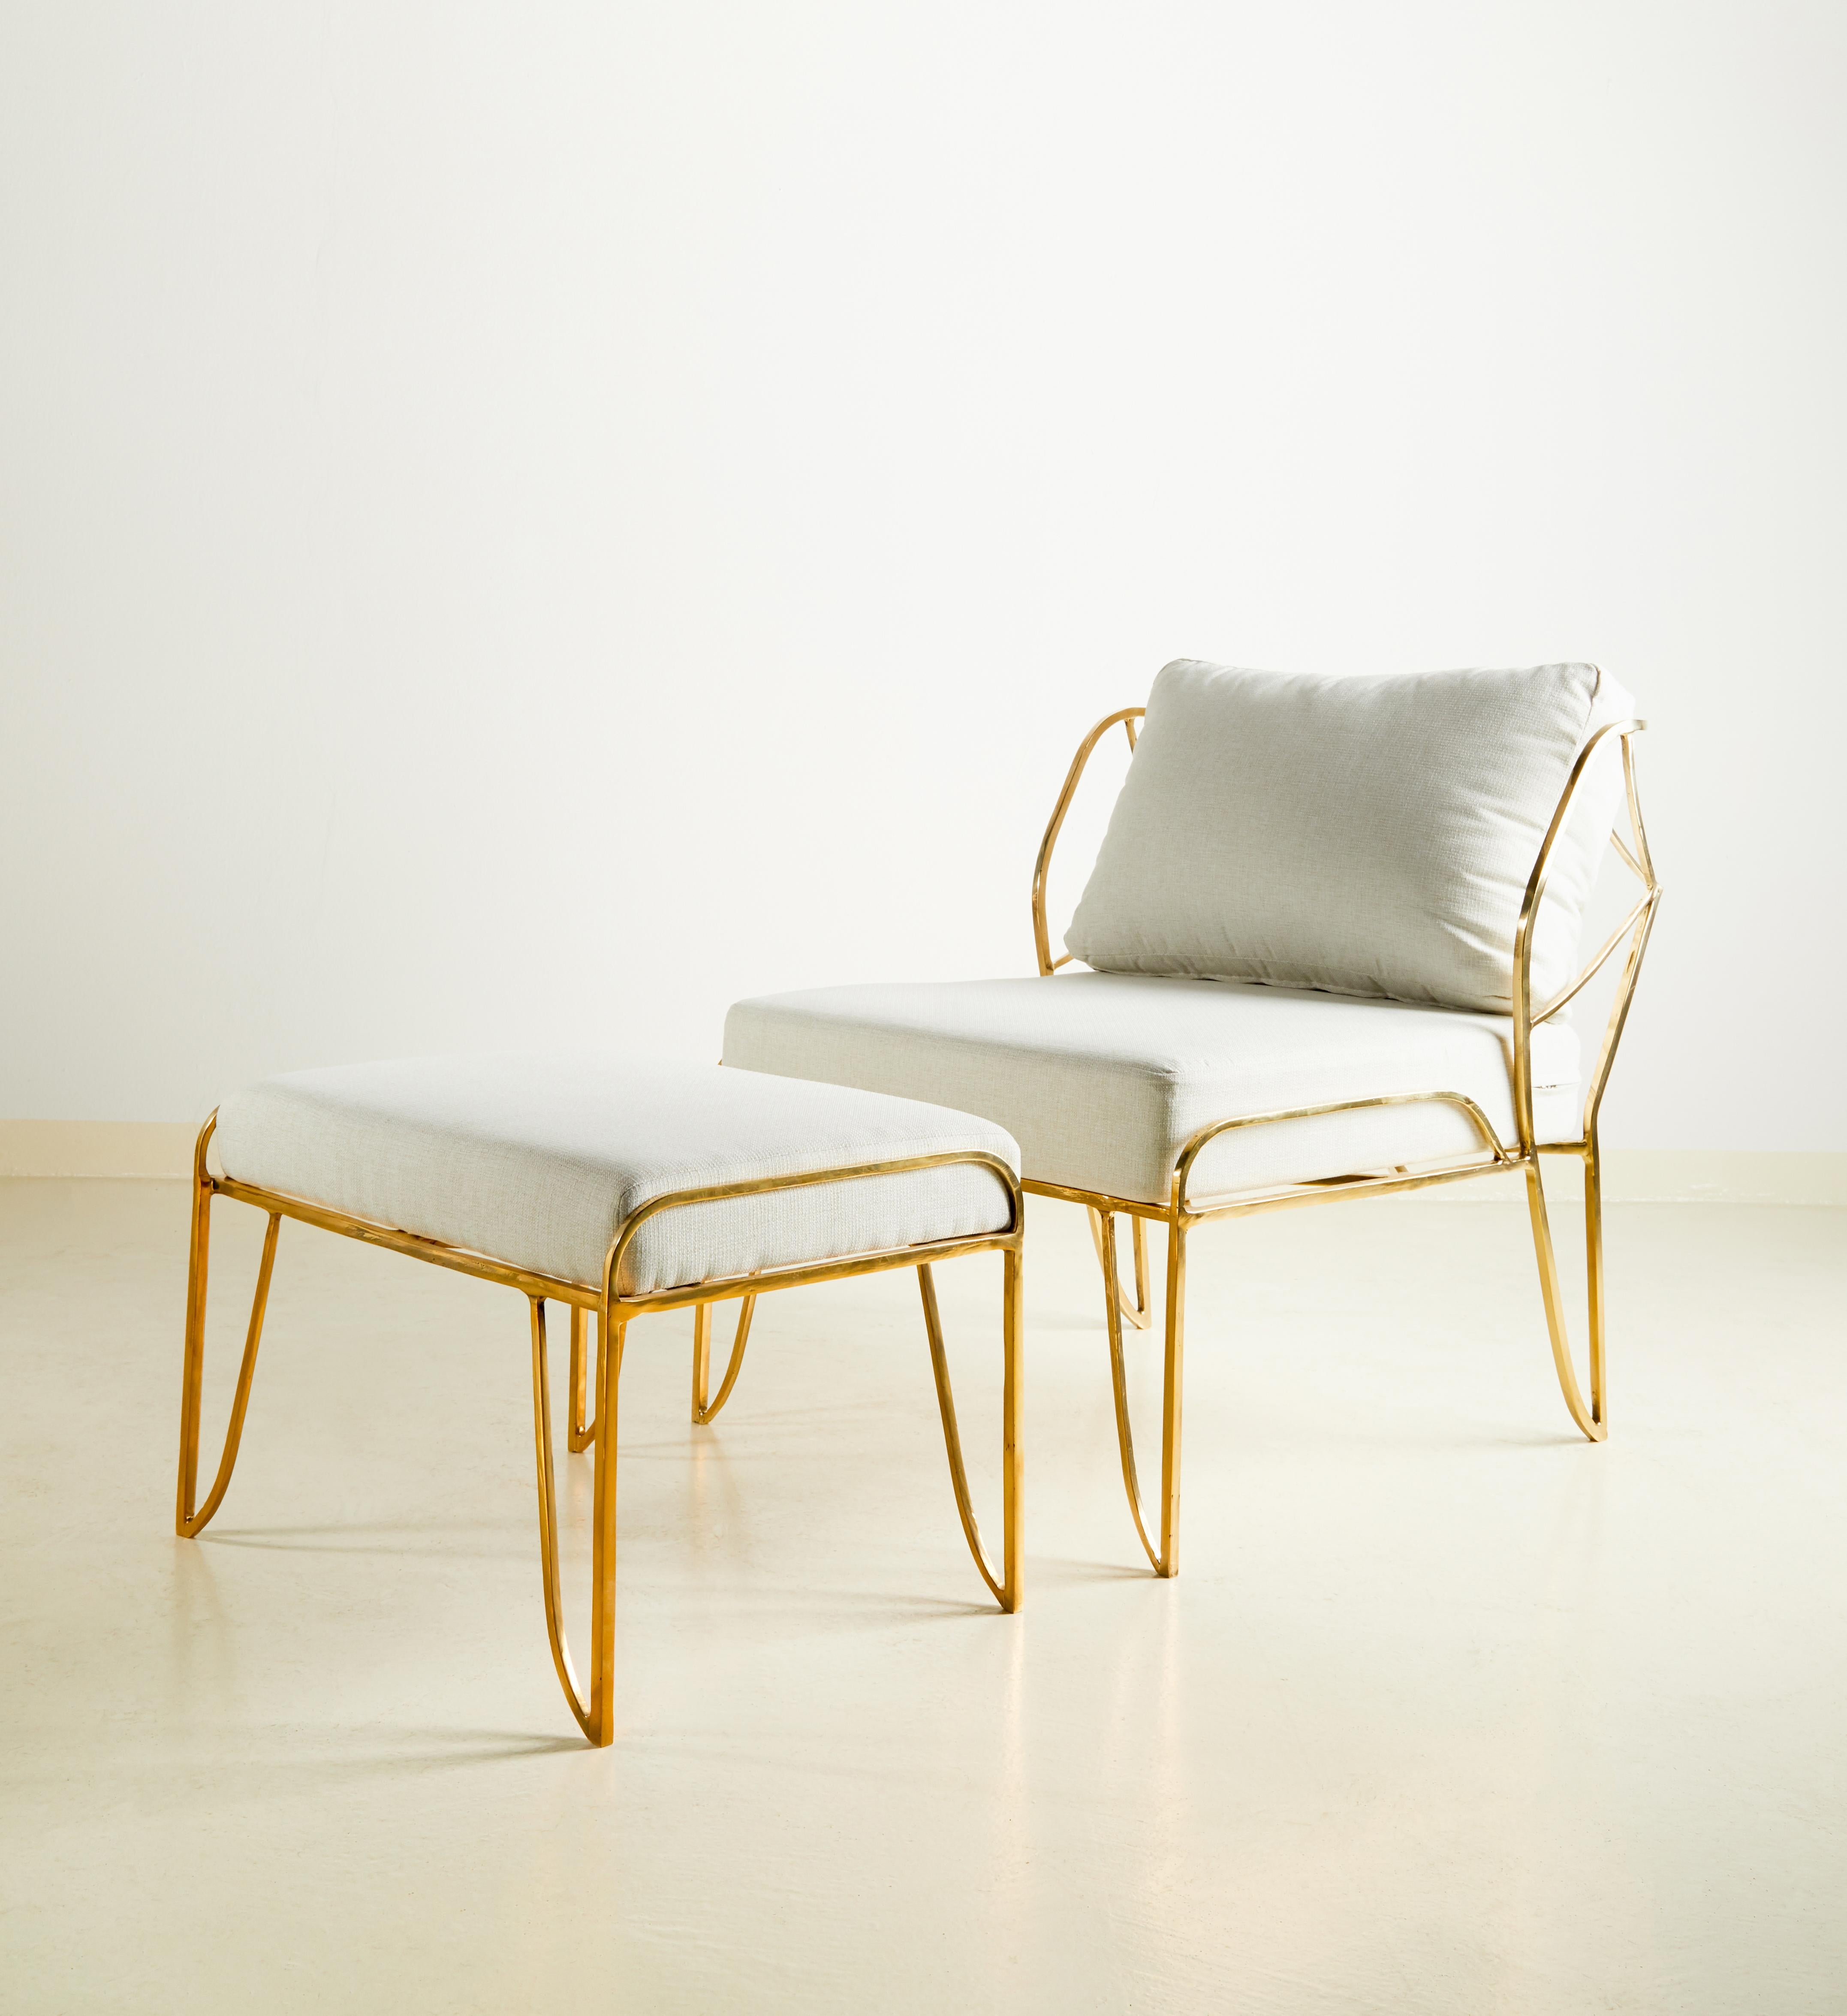 Brass hand-sculpted armchair and stool, Lena, Misaya
Dimensions:
Chair: H 76 x W 65 x L 80 cm
Stool: 38 x 61 x 42 cm
Hand-sculpted brass and marble tables.